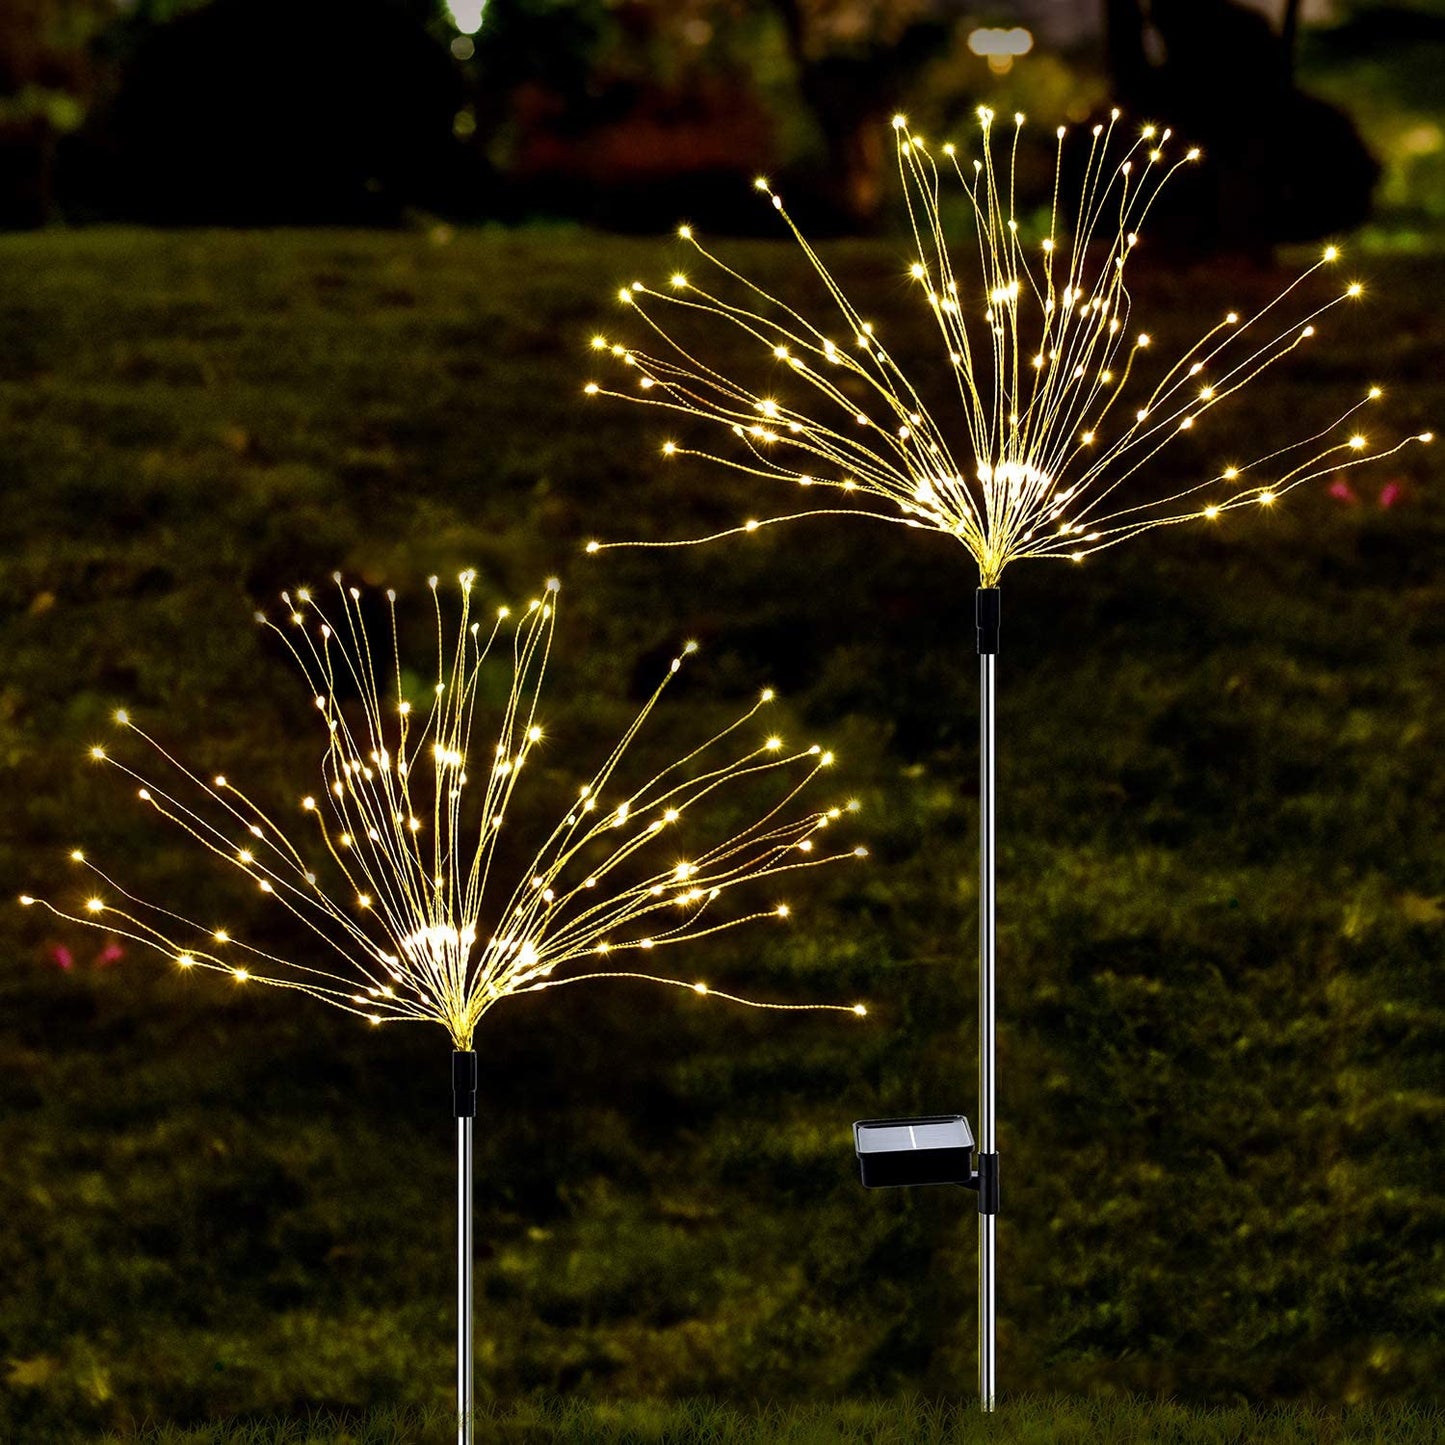 Ooklee Solar Firework Lights - 150 LED 8 Modes Outdoor Solar Garden Deorative Lights, Copper Wires String Landscape Stake Light for Walkway Patio Lawn Backyard Christmas Decoration (Cool White)